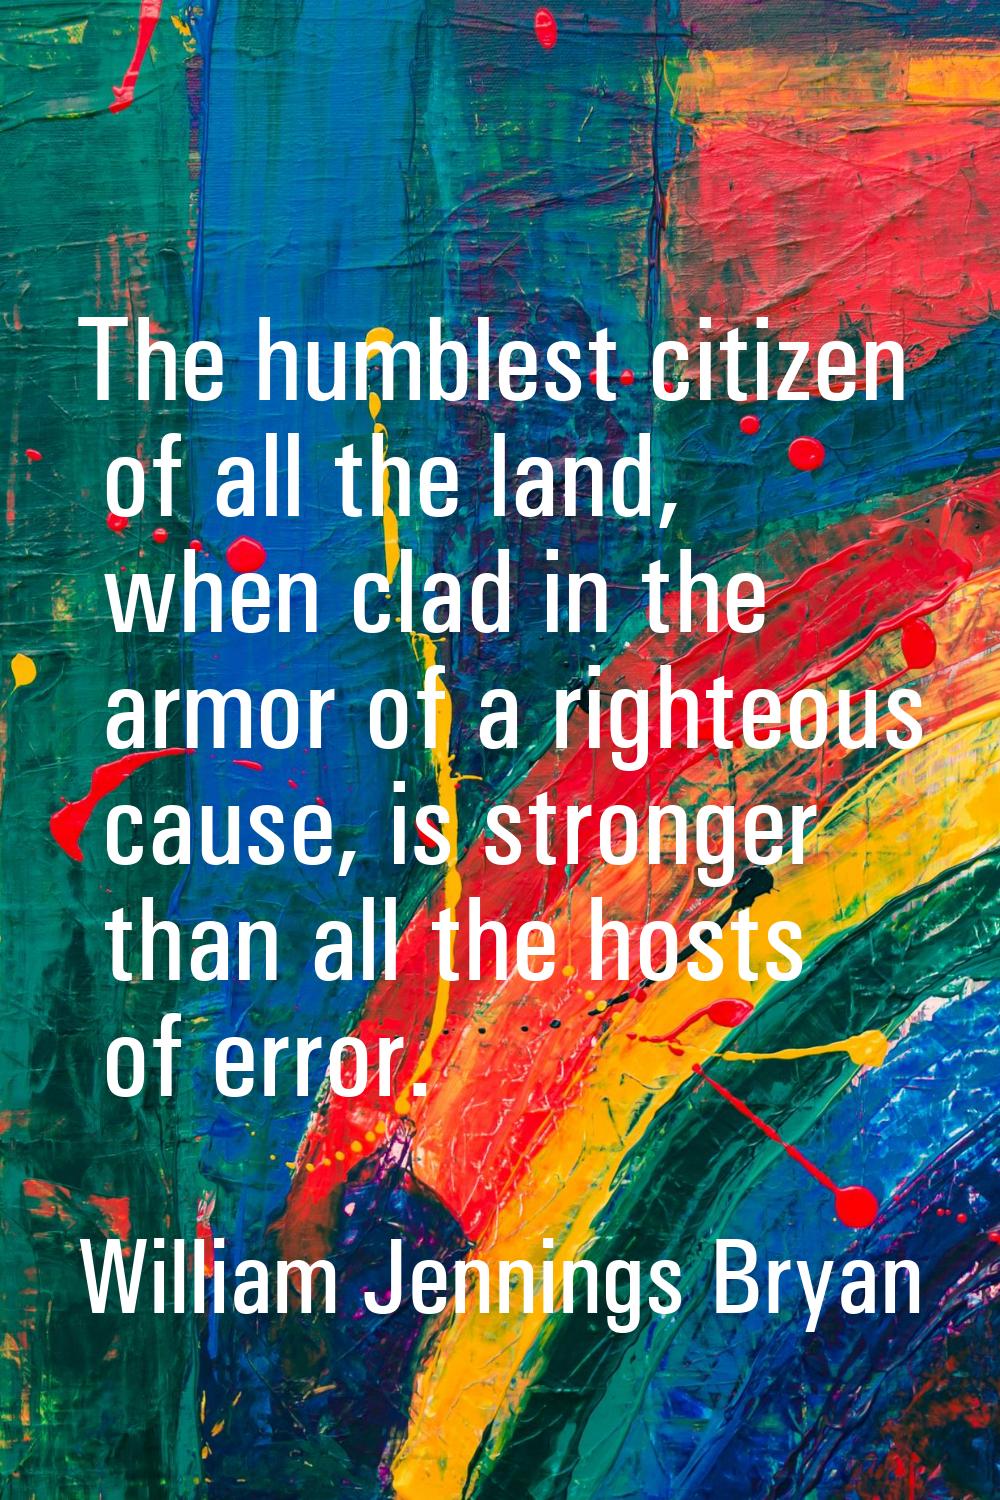 The humblest citizen of all the land, when clad in the armor of a righteous cause, is stronger than